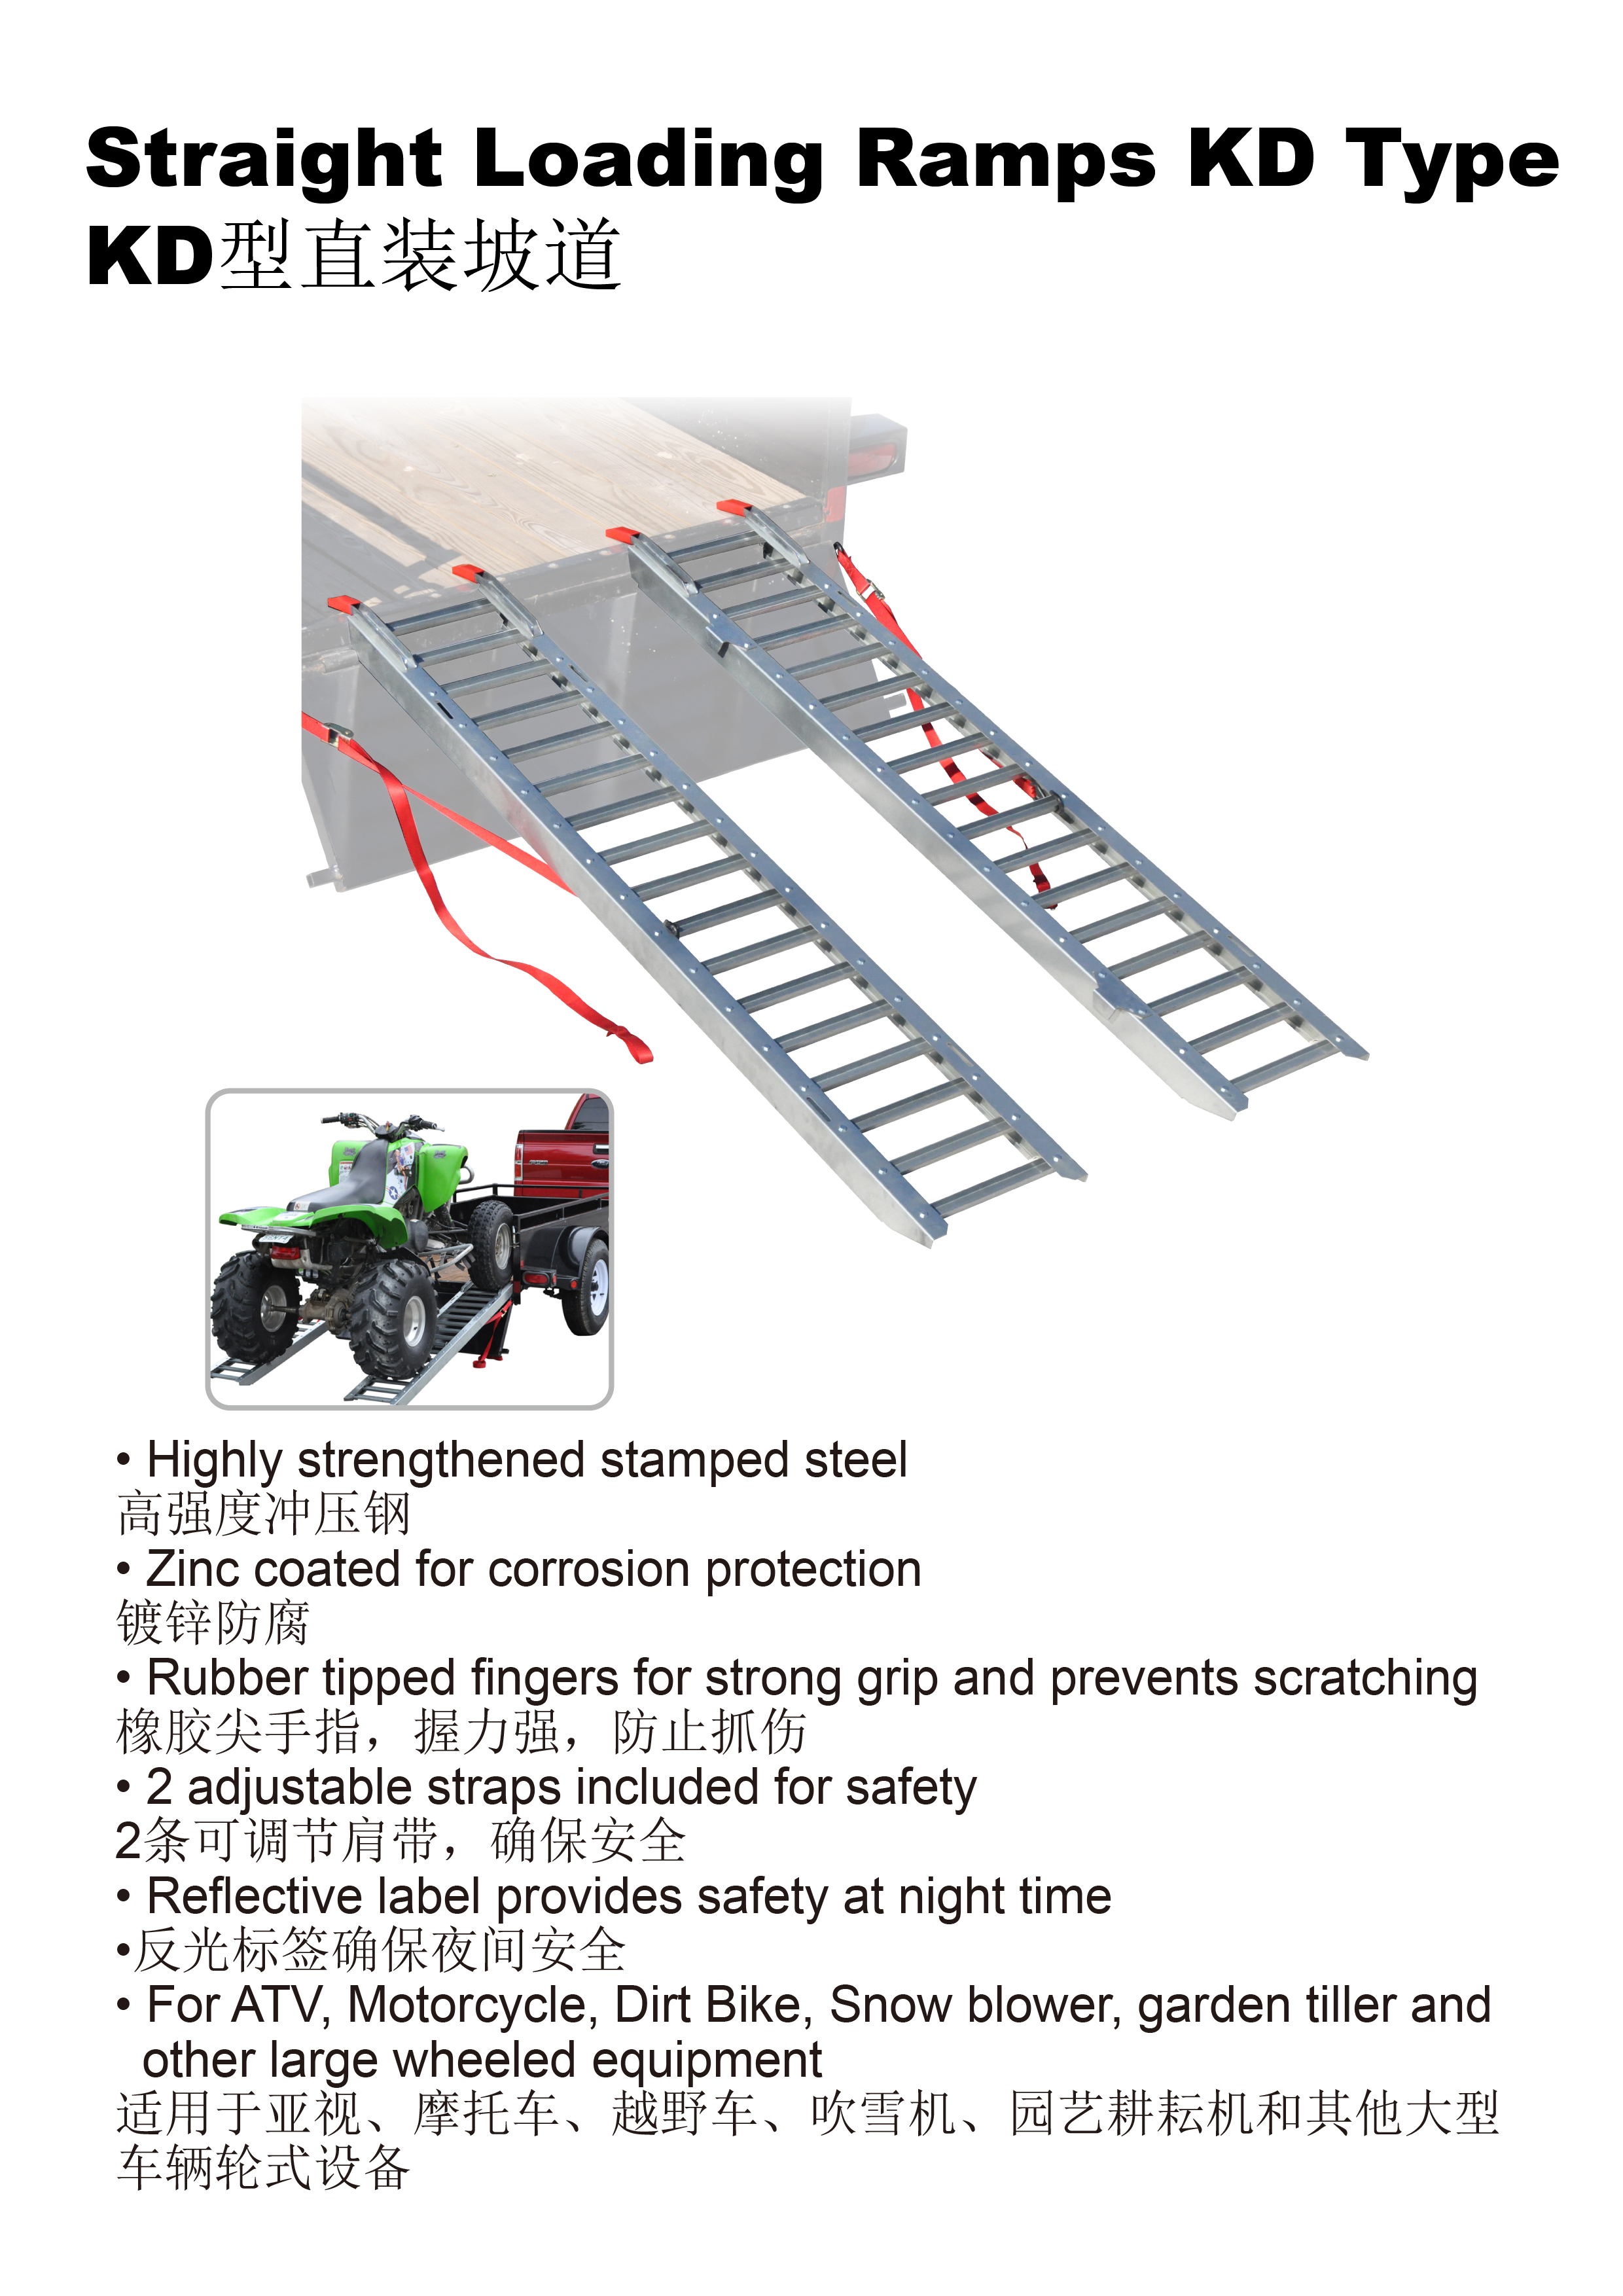 Straight Loading Ramps KD Type